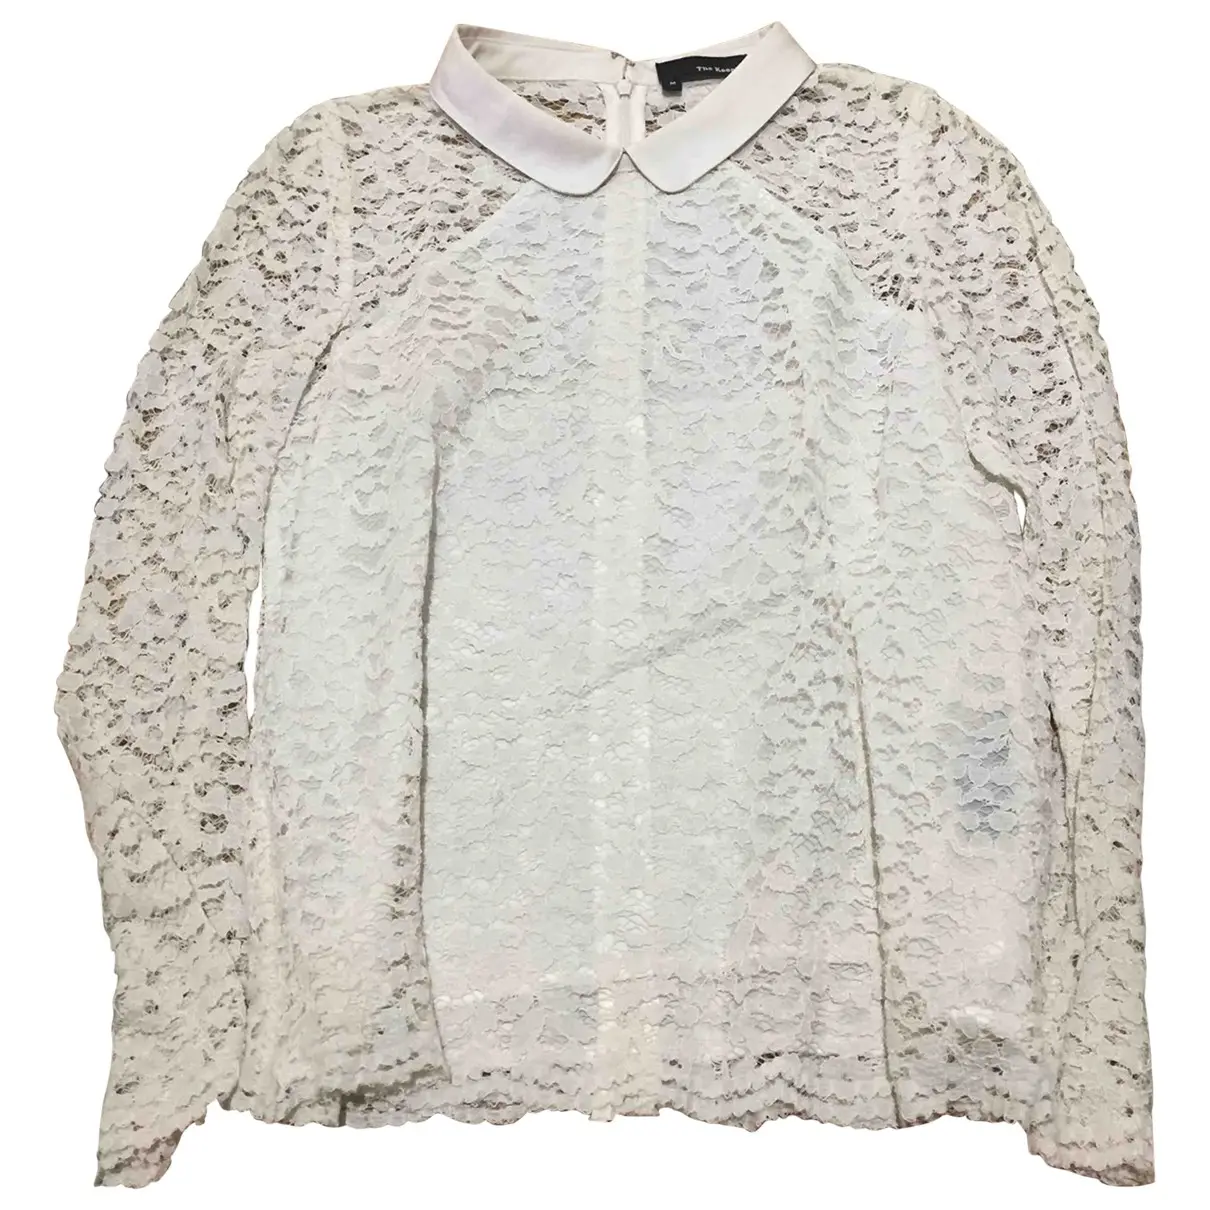 Lace blouse The Kooples